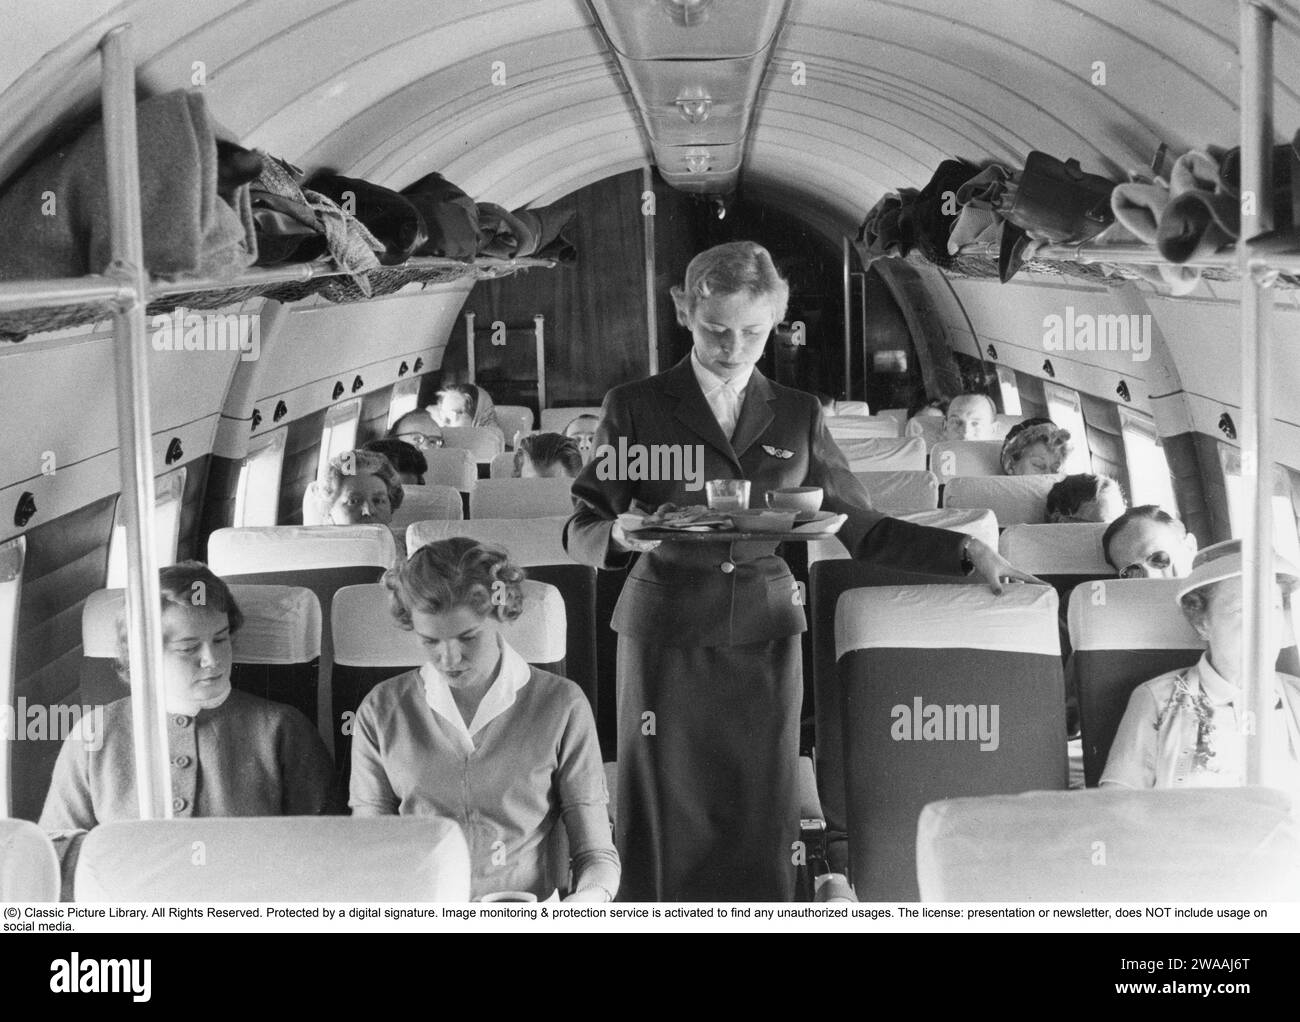 Airline travelling in the 1950s. A group of women and  men on an swedish passenger airplane in the 1950s. The female flight attendant is standing in the middle of the airplane serving coffee and sandwiches to the passengers. Sweden 1957 Stock Photo